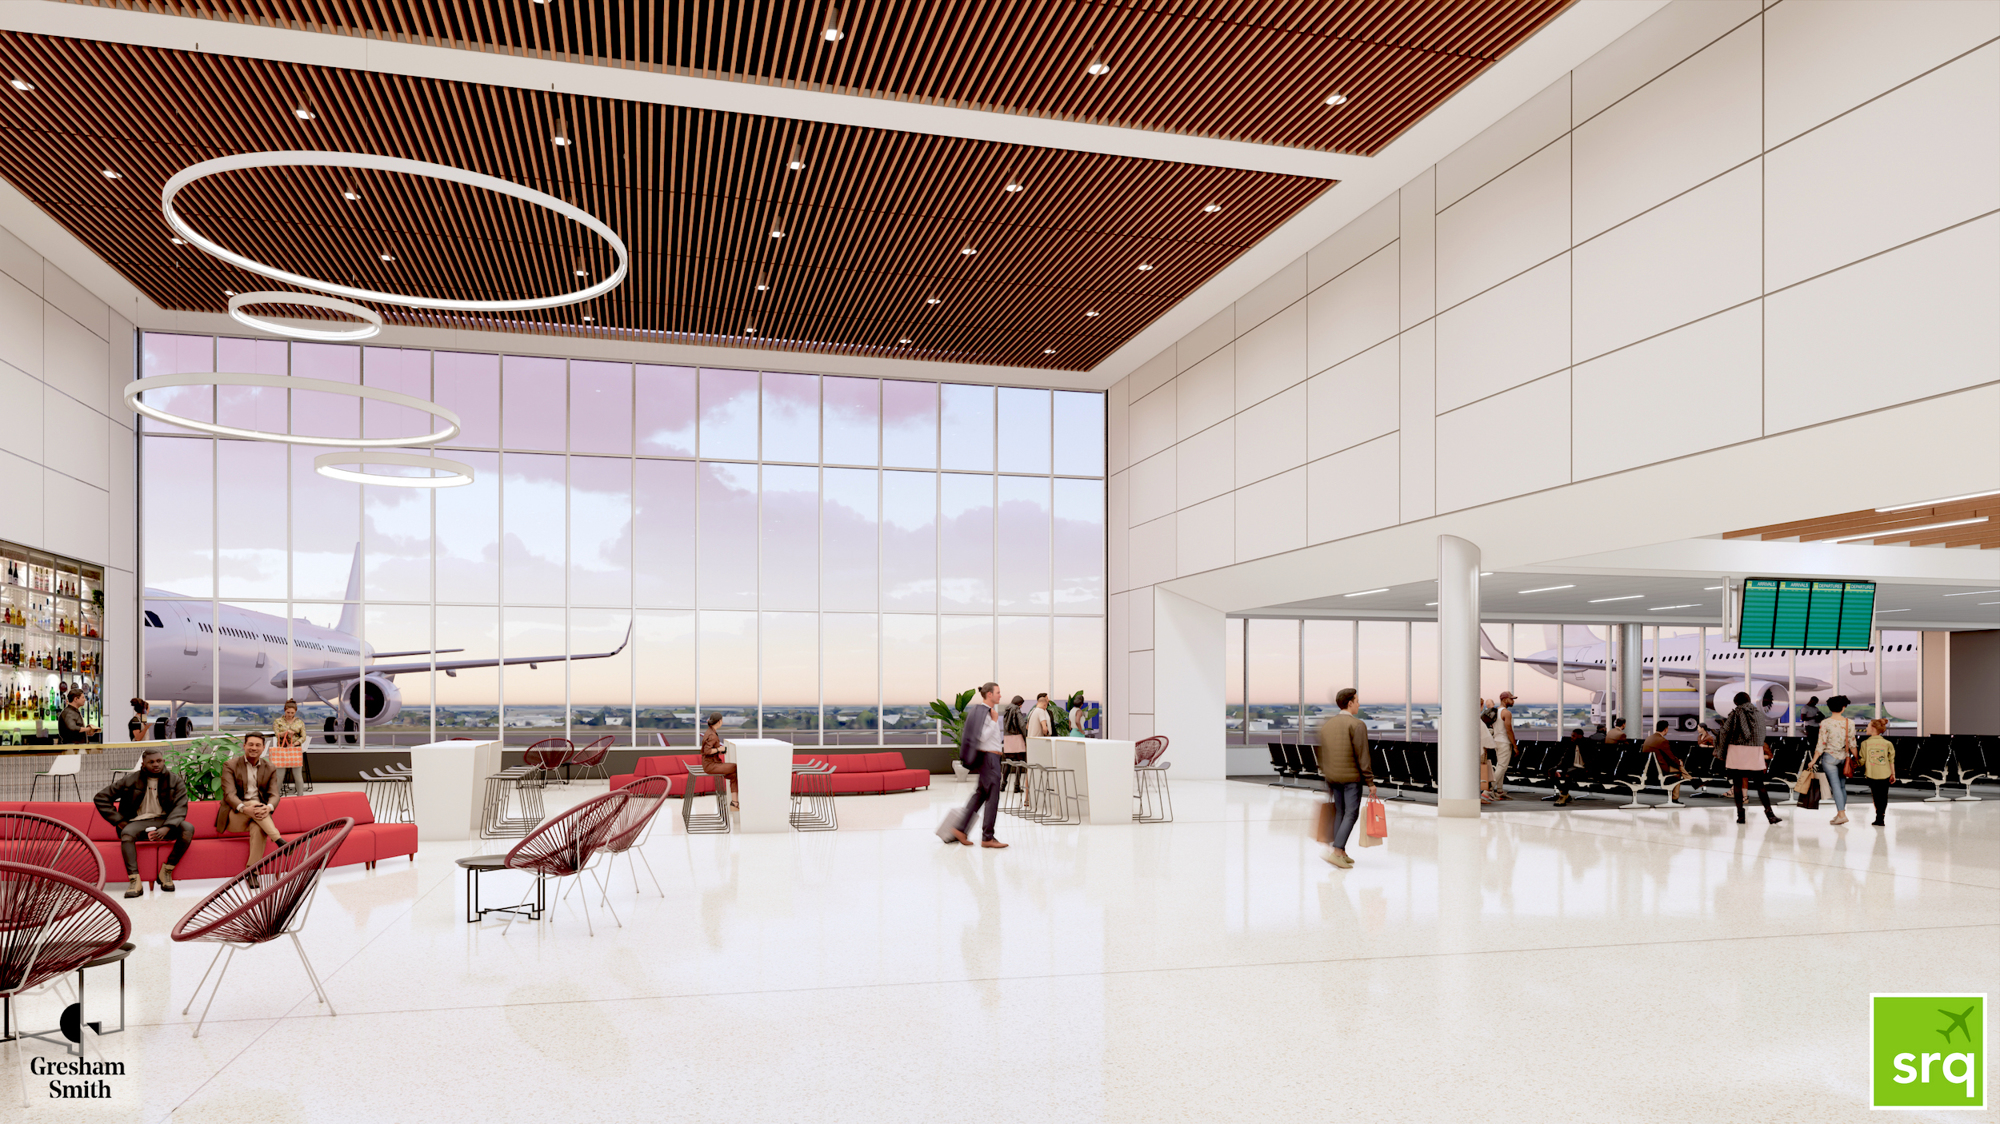 The holdroom at SRQ's ground boarding facility will provide a waiting area for five new gates. (Rendering courtesy of SRQ)